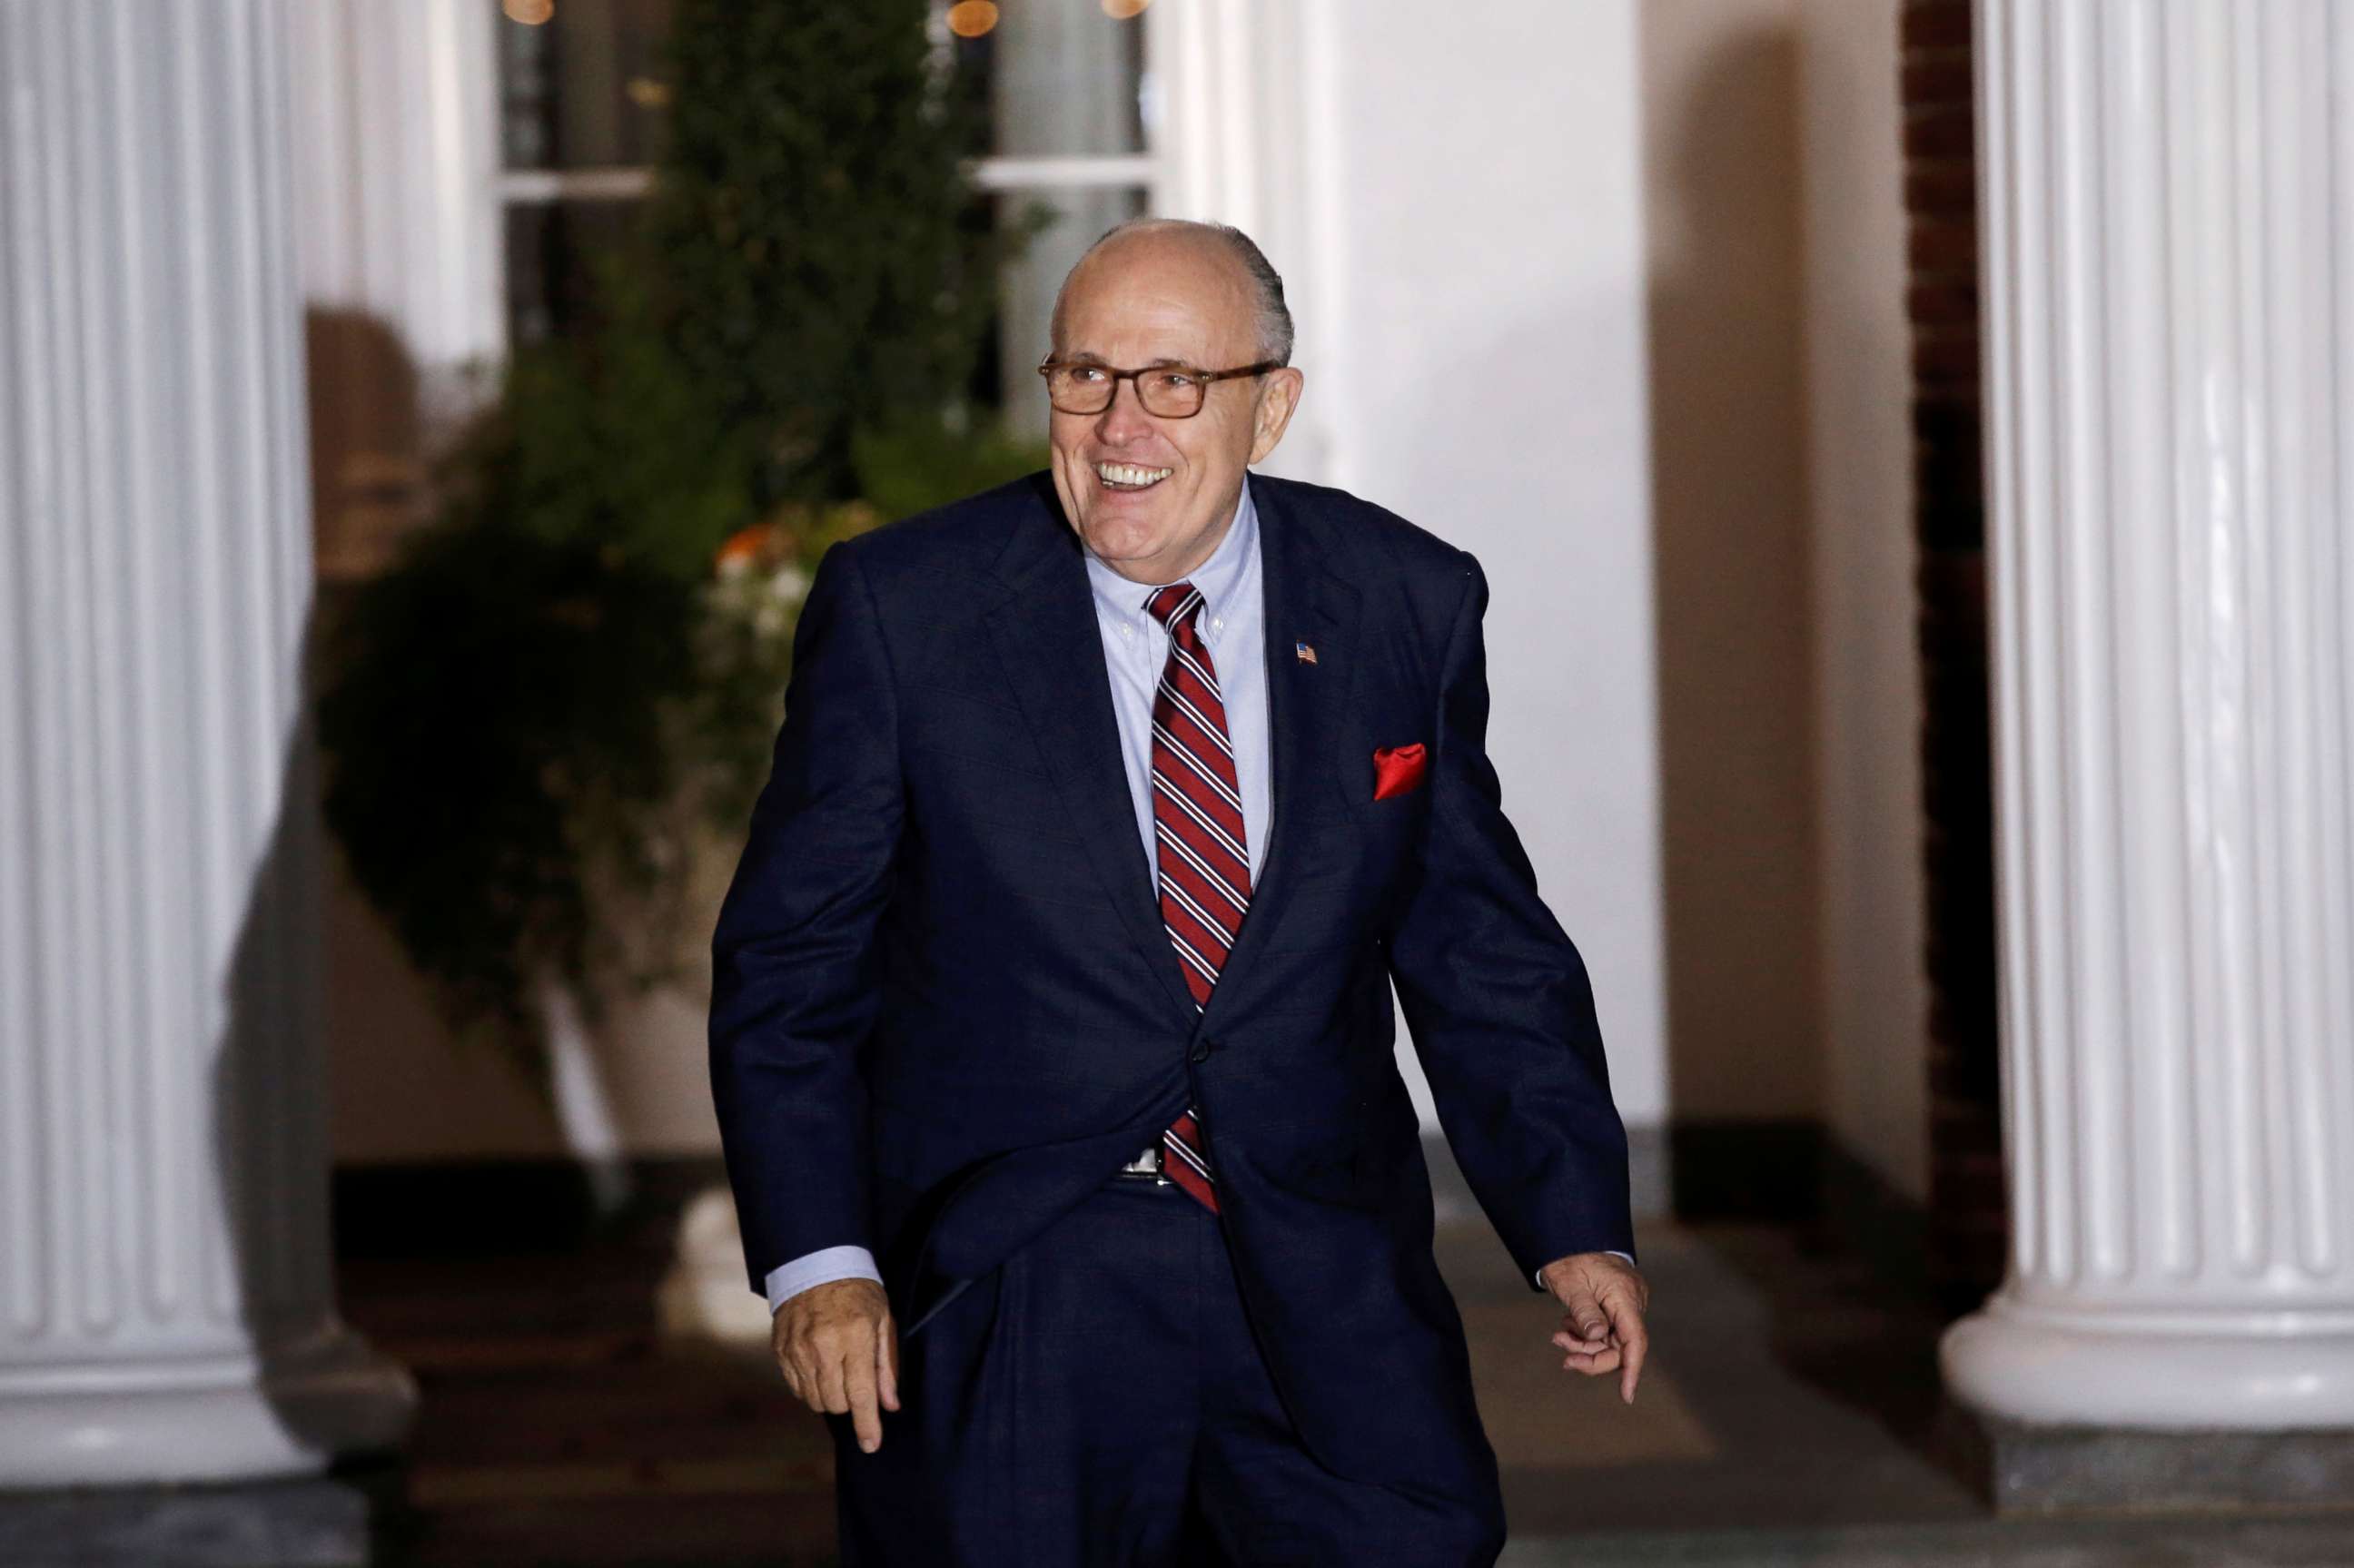 PHOTO: Former New York City Mayor Rudolf Giuliani departs after meeting with then-President-elect Donald Trump at Trump National Golf Club in Bedminster, N.J., Nov. 20, 2016.